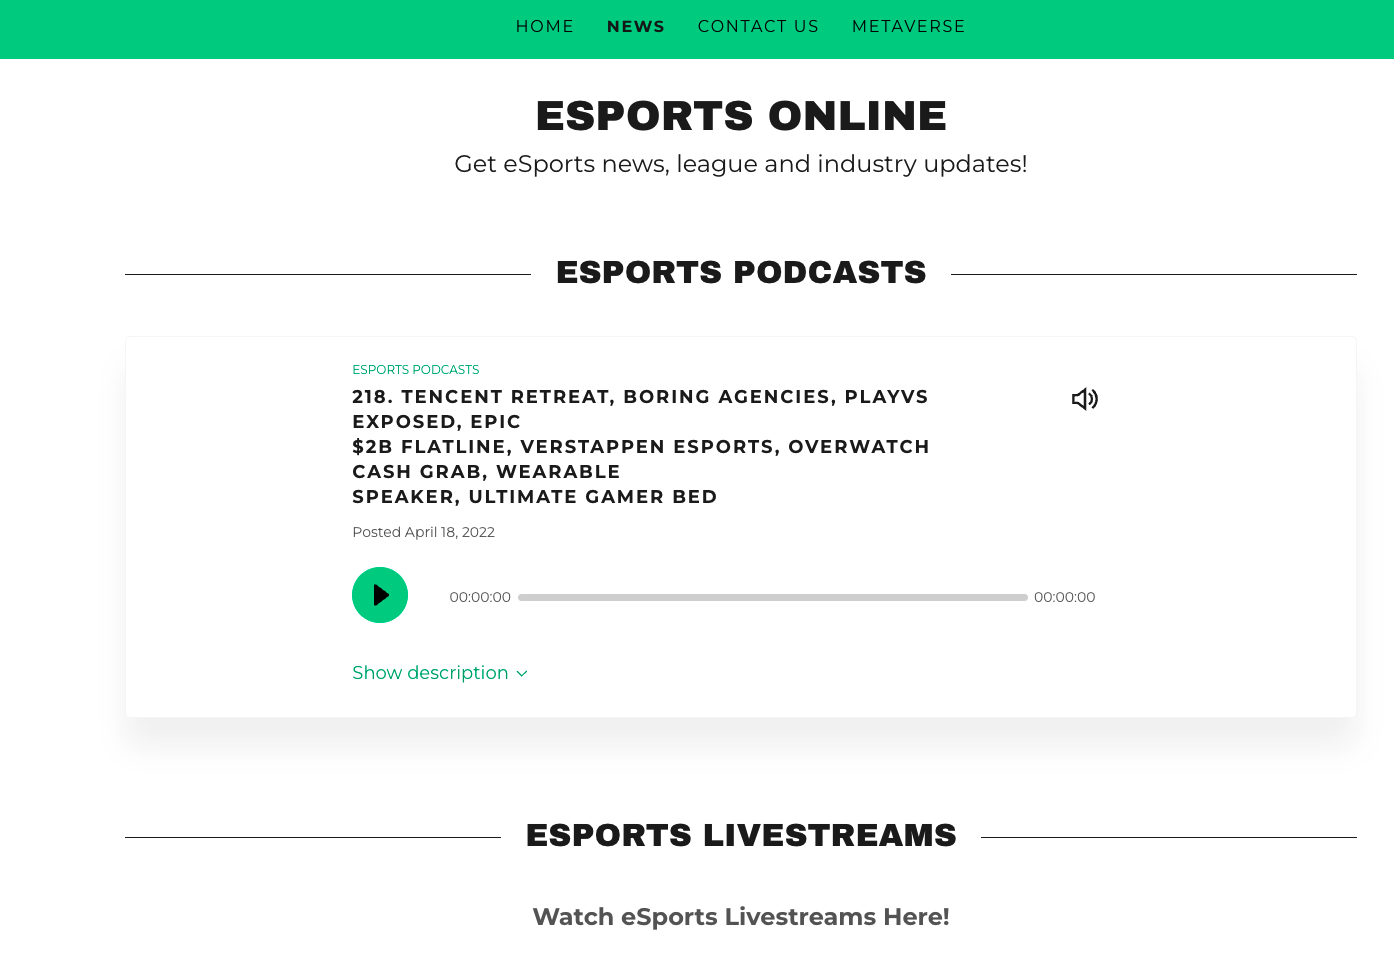 Check out eSports Online!